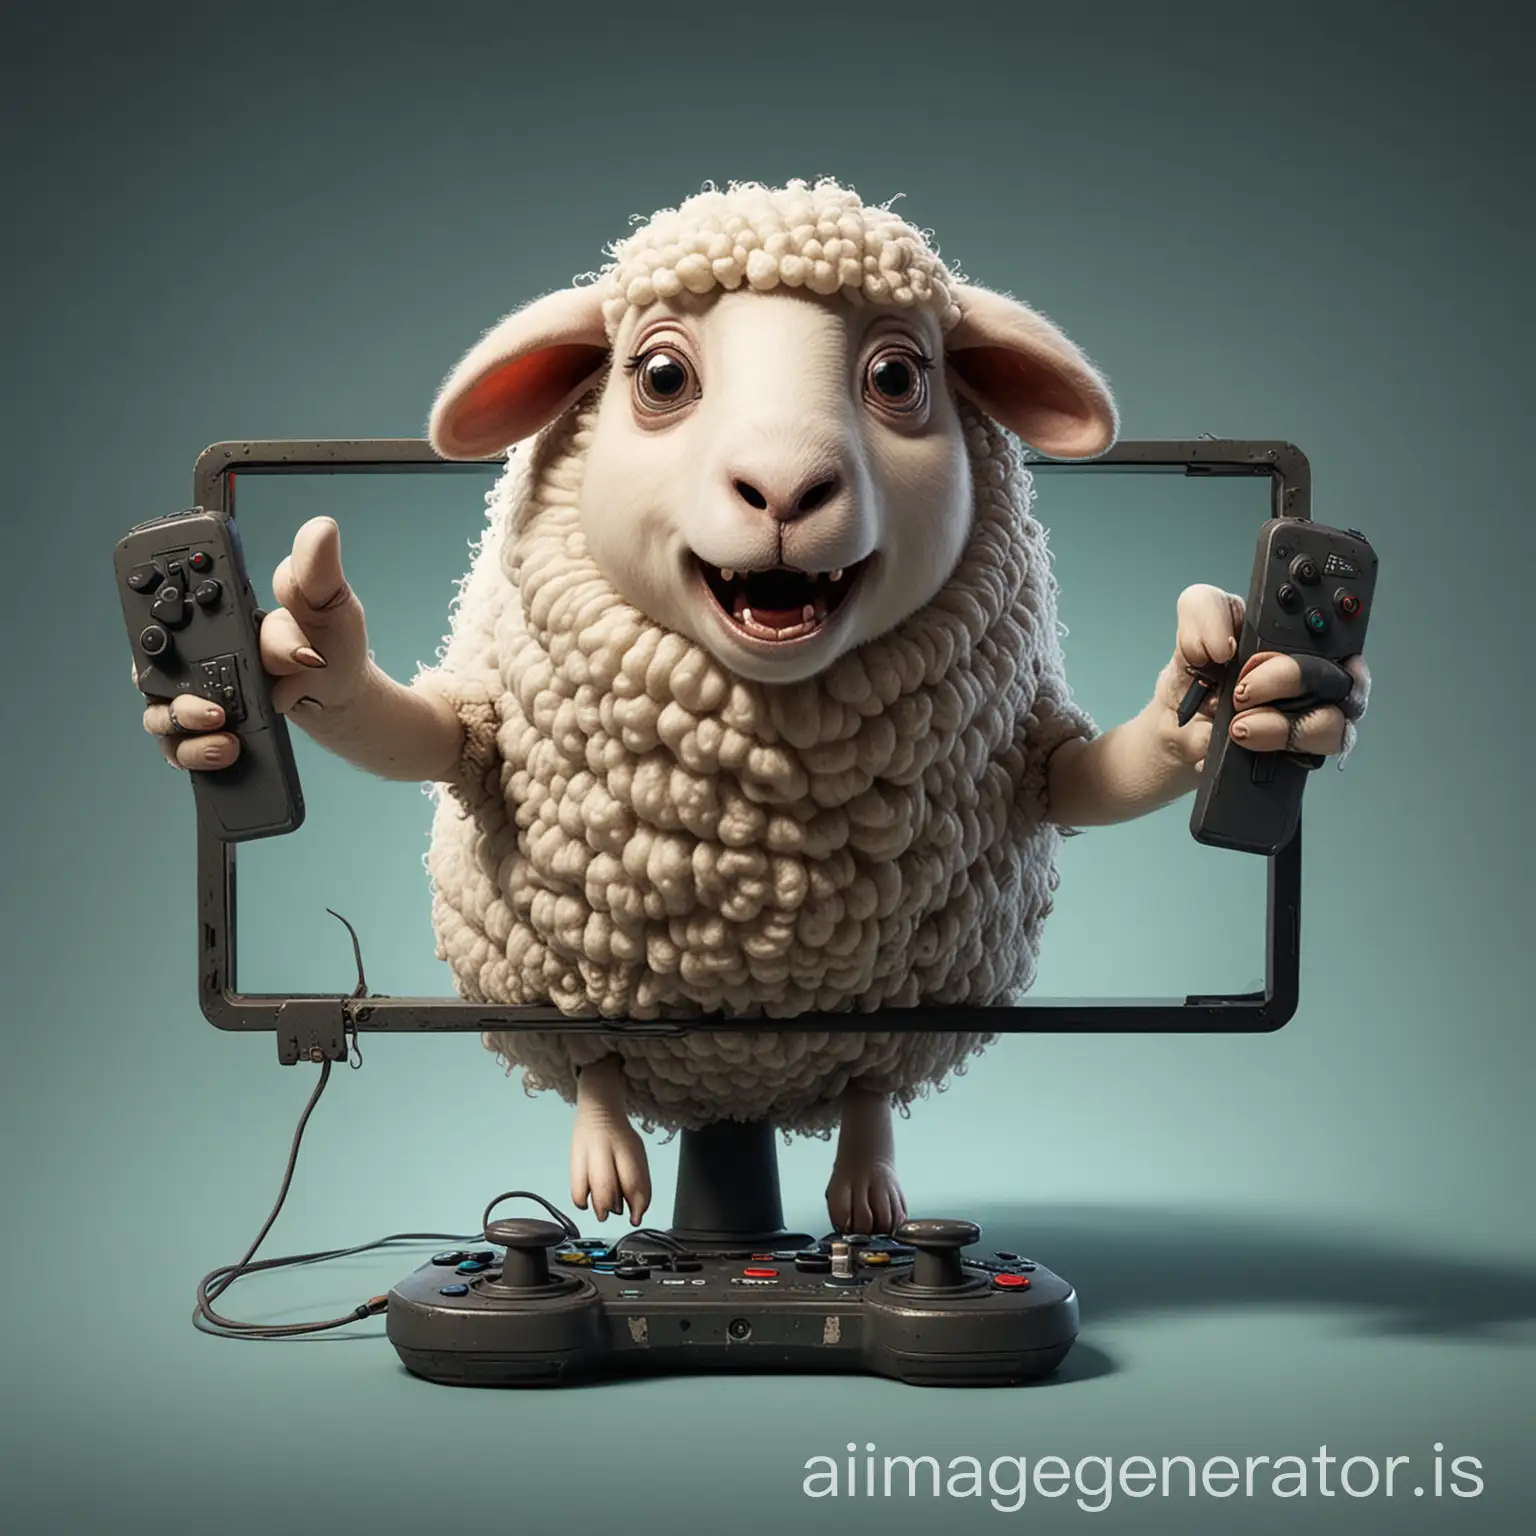 a sheep character in a gaming screen running scared of being chased and human being holding the joystick